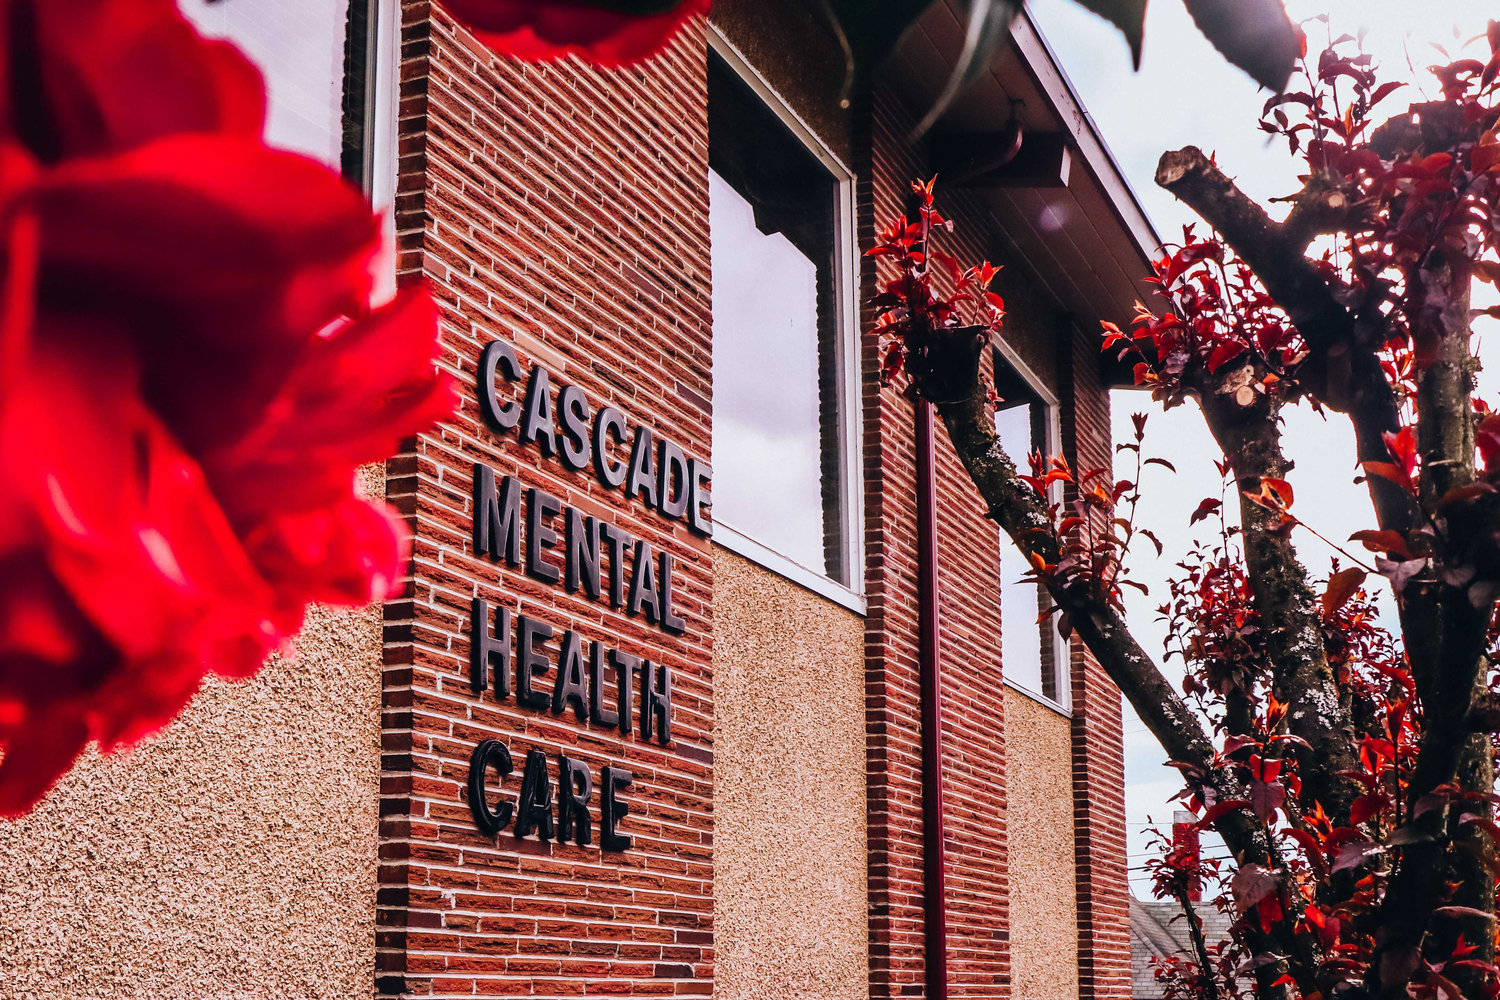 Flowers are seen in bloom in front of Cascade Mental Health Care's downtown Chehalis office.